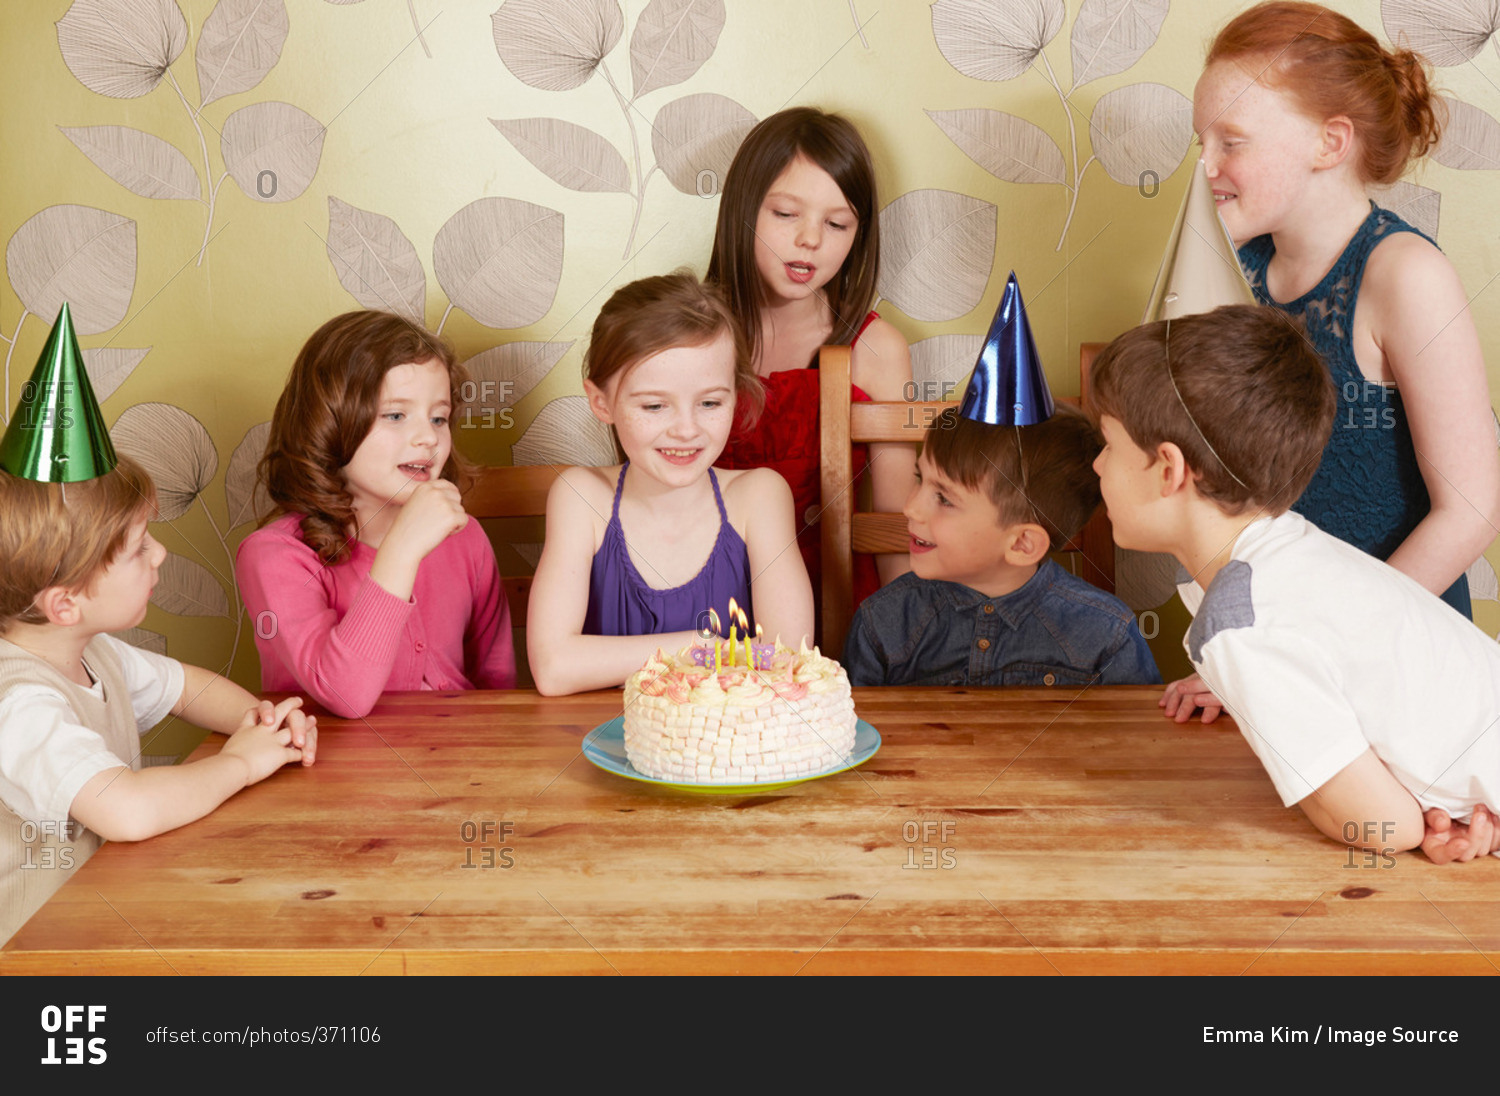 Children at birthday party, girl with cake